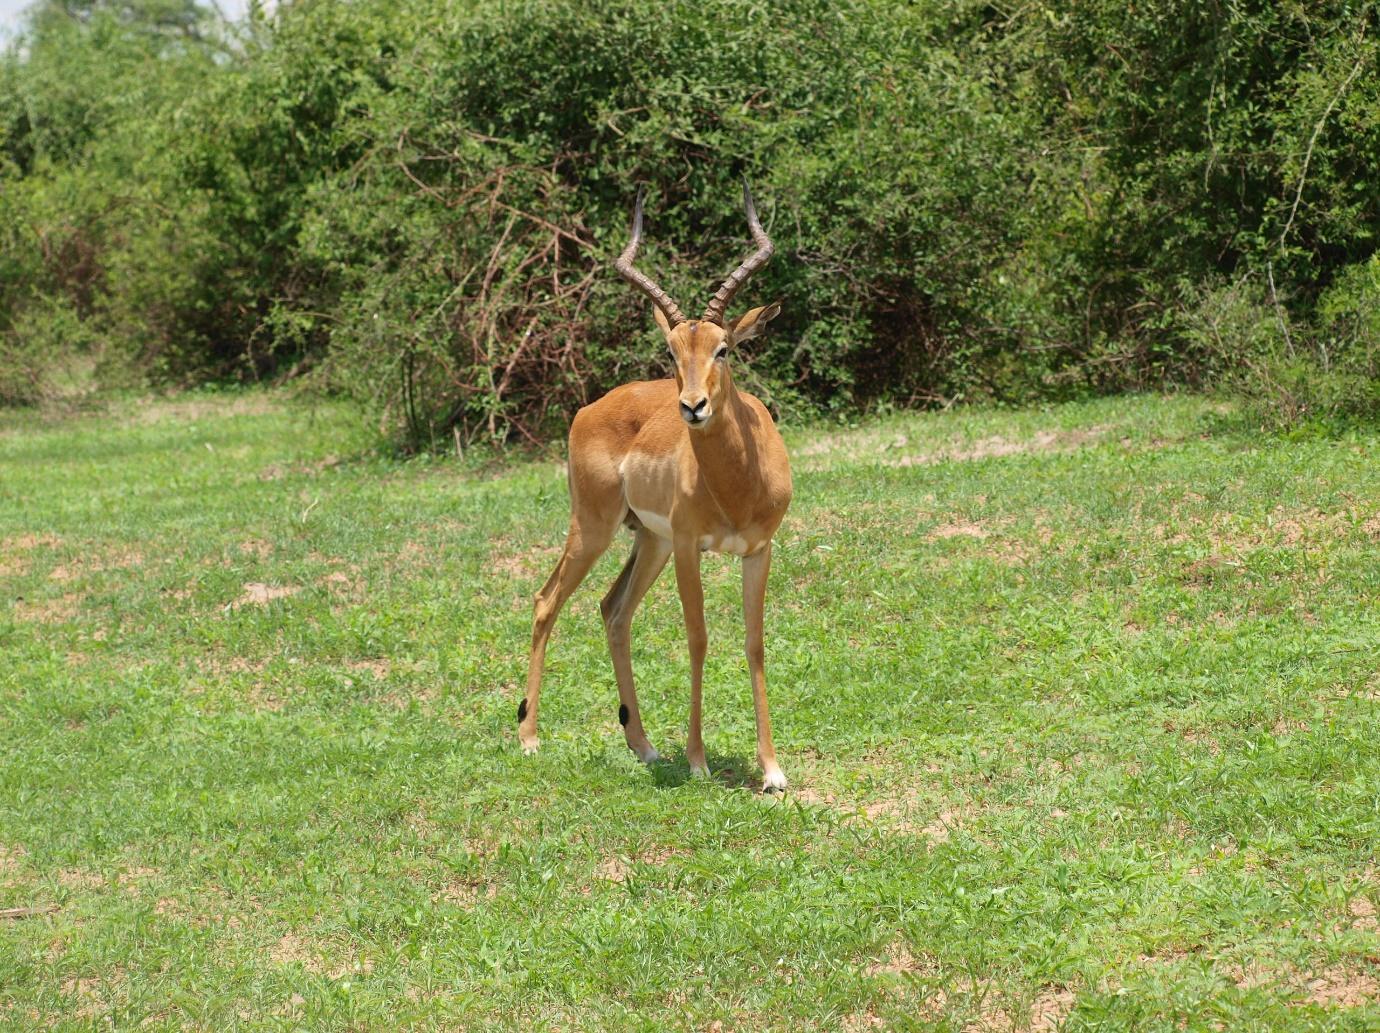 A deer standing in a grassy area

Description automatically generated with low confidence